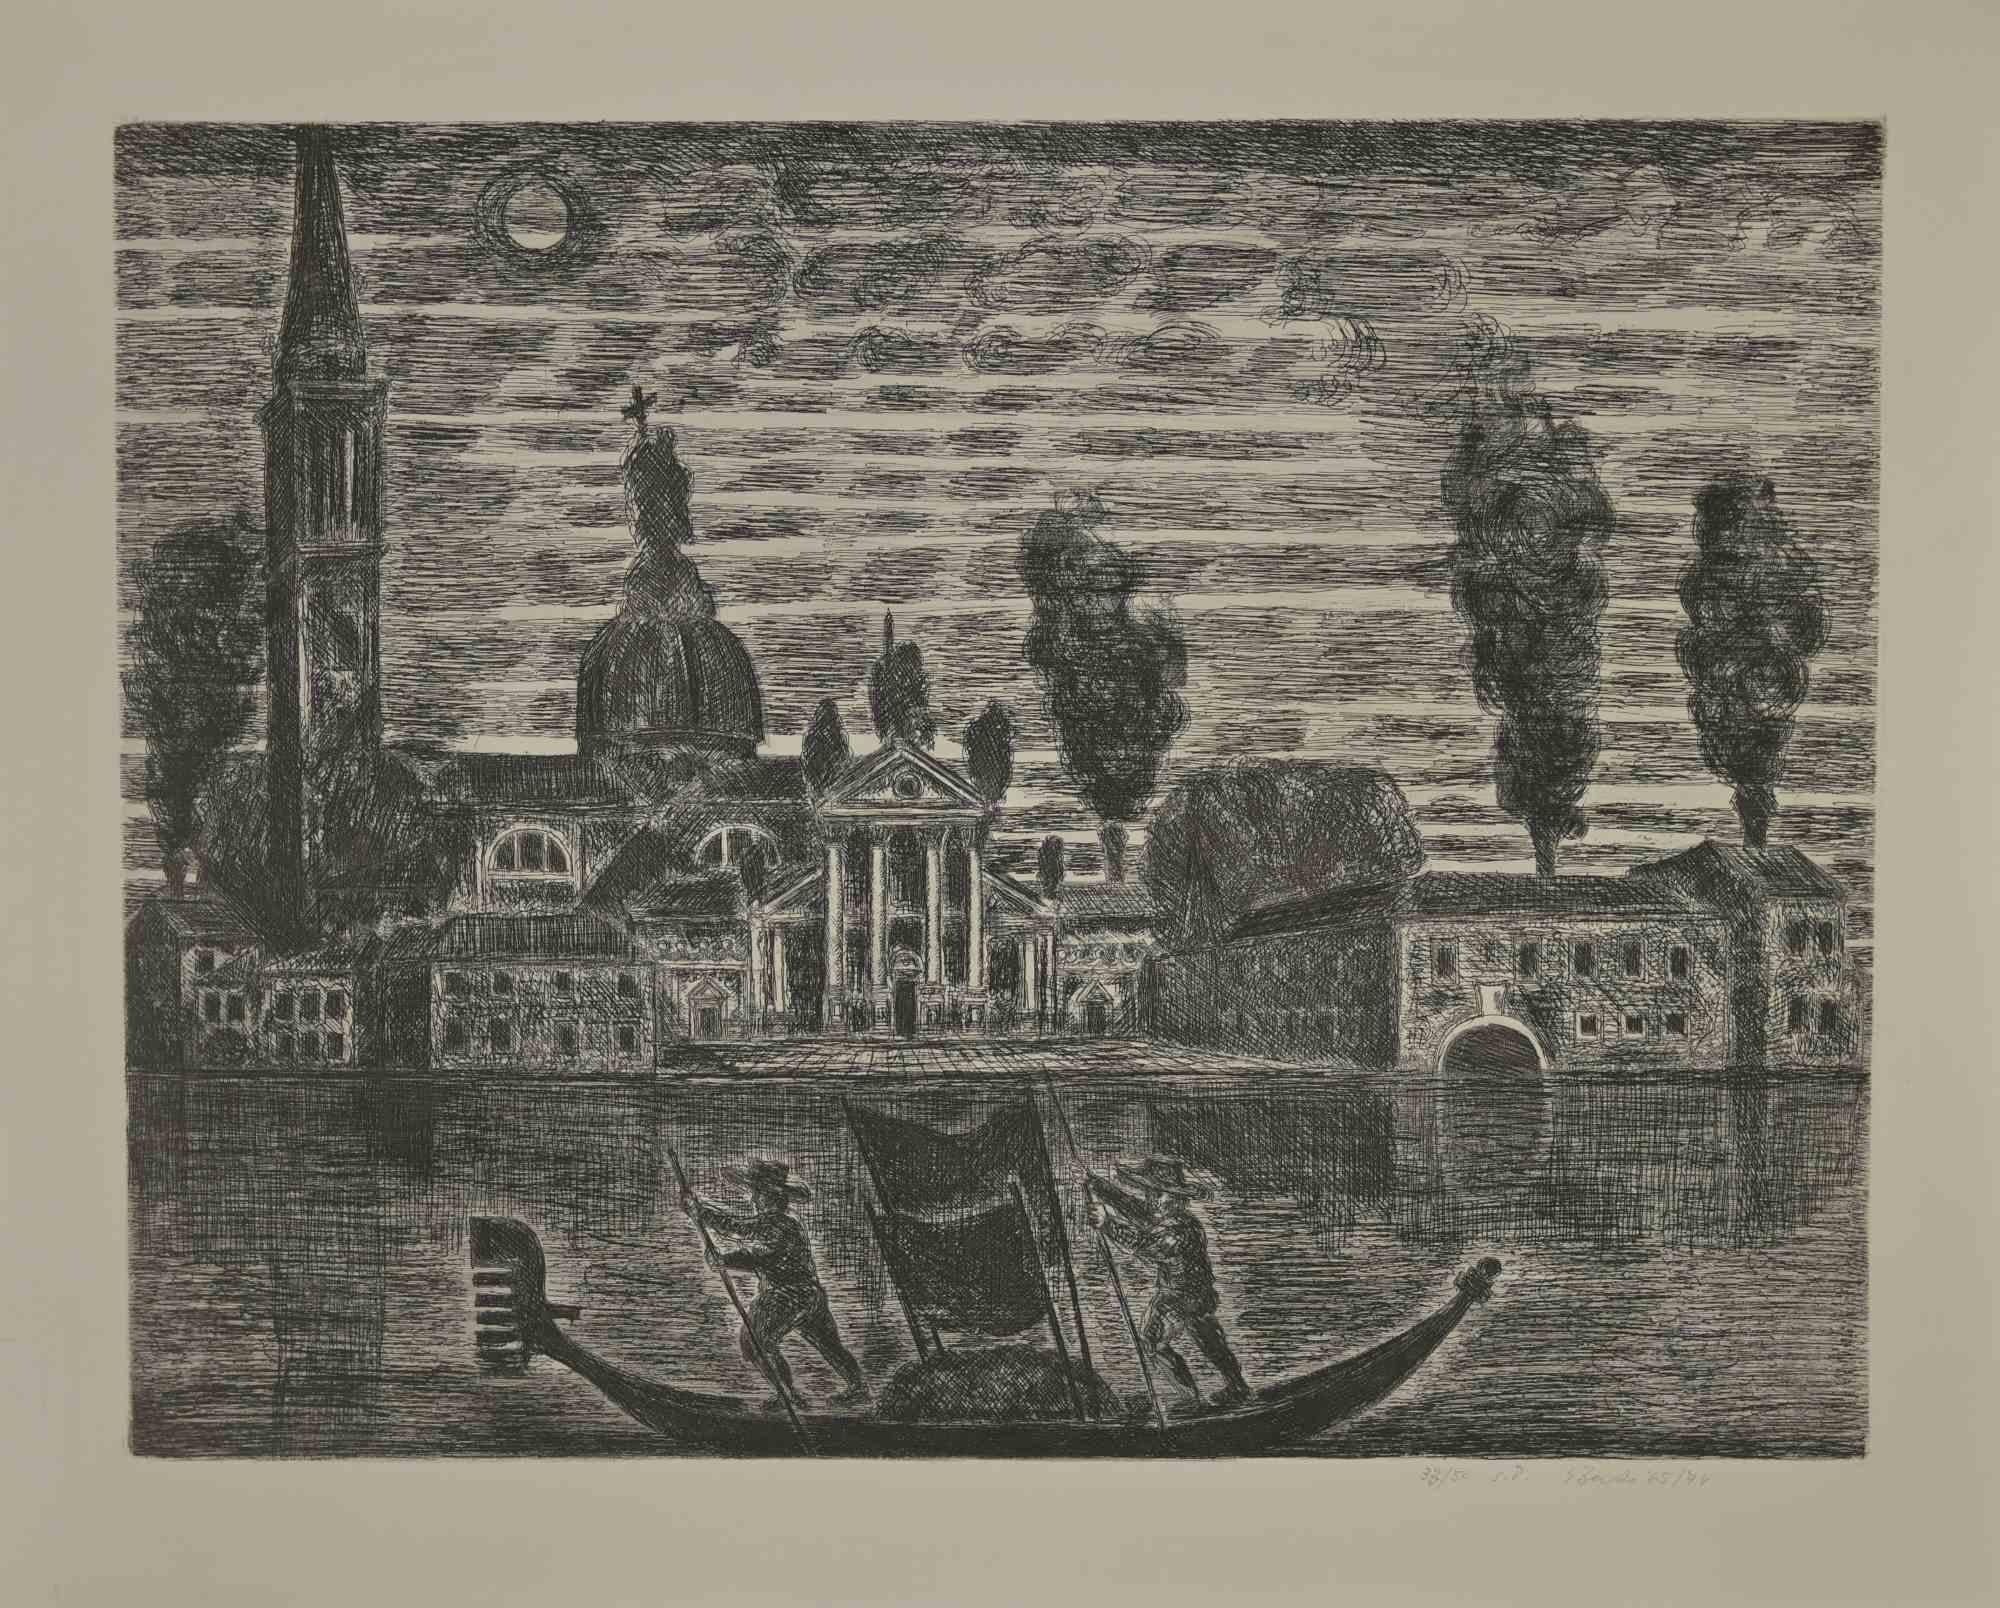 Gondoliers in Venice is an etching realized by Gianpaolo Berto in 1974.

60 X 75 cm , no frame.

Edition 33/50. Numbered and firmed by the artist in the lower margin.

Good conditions.

 

Gianpaolo Berto (1940) was born and raised in the